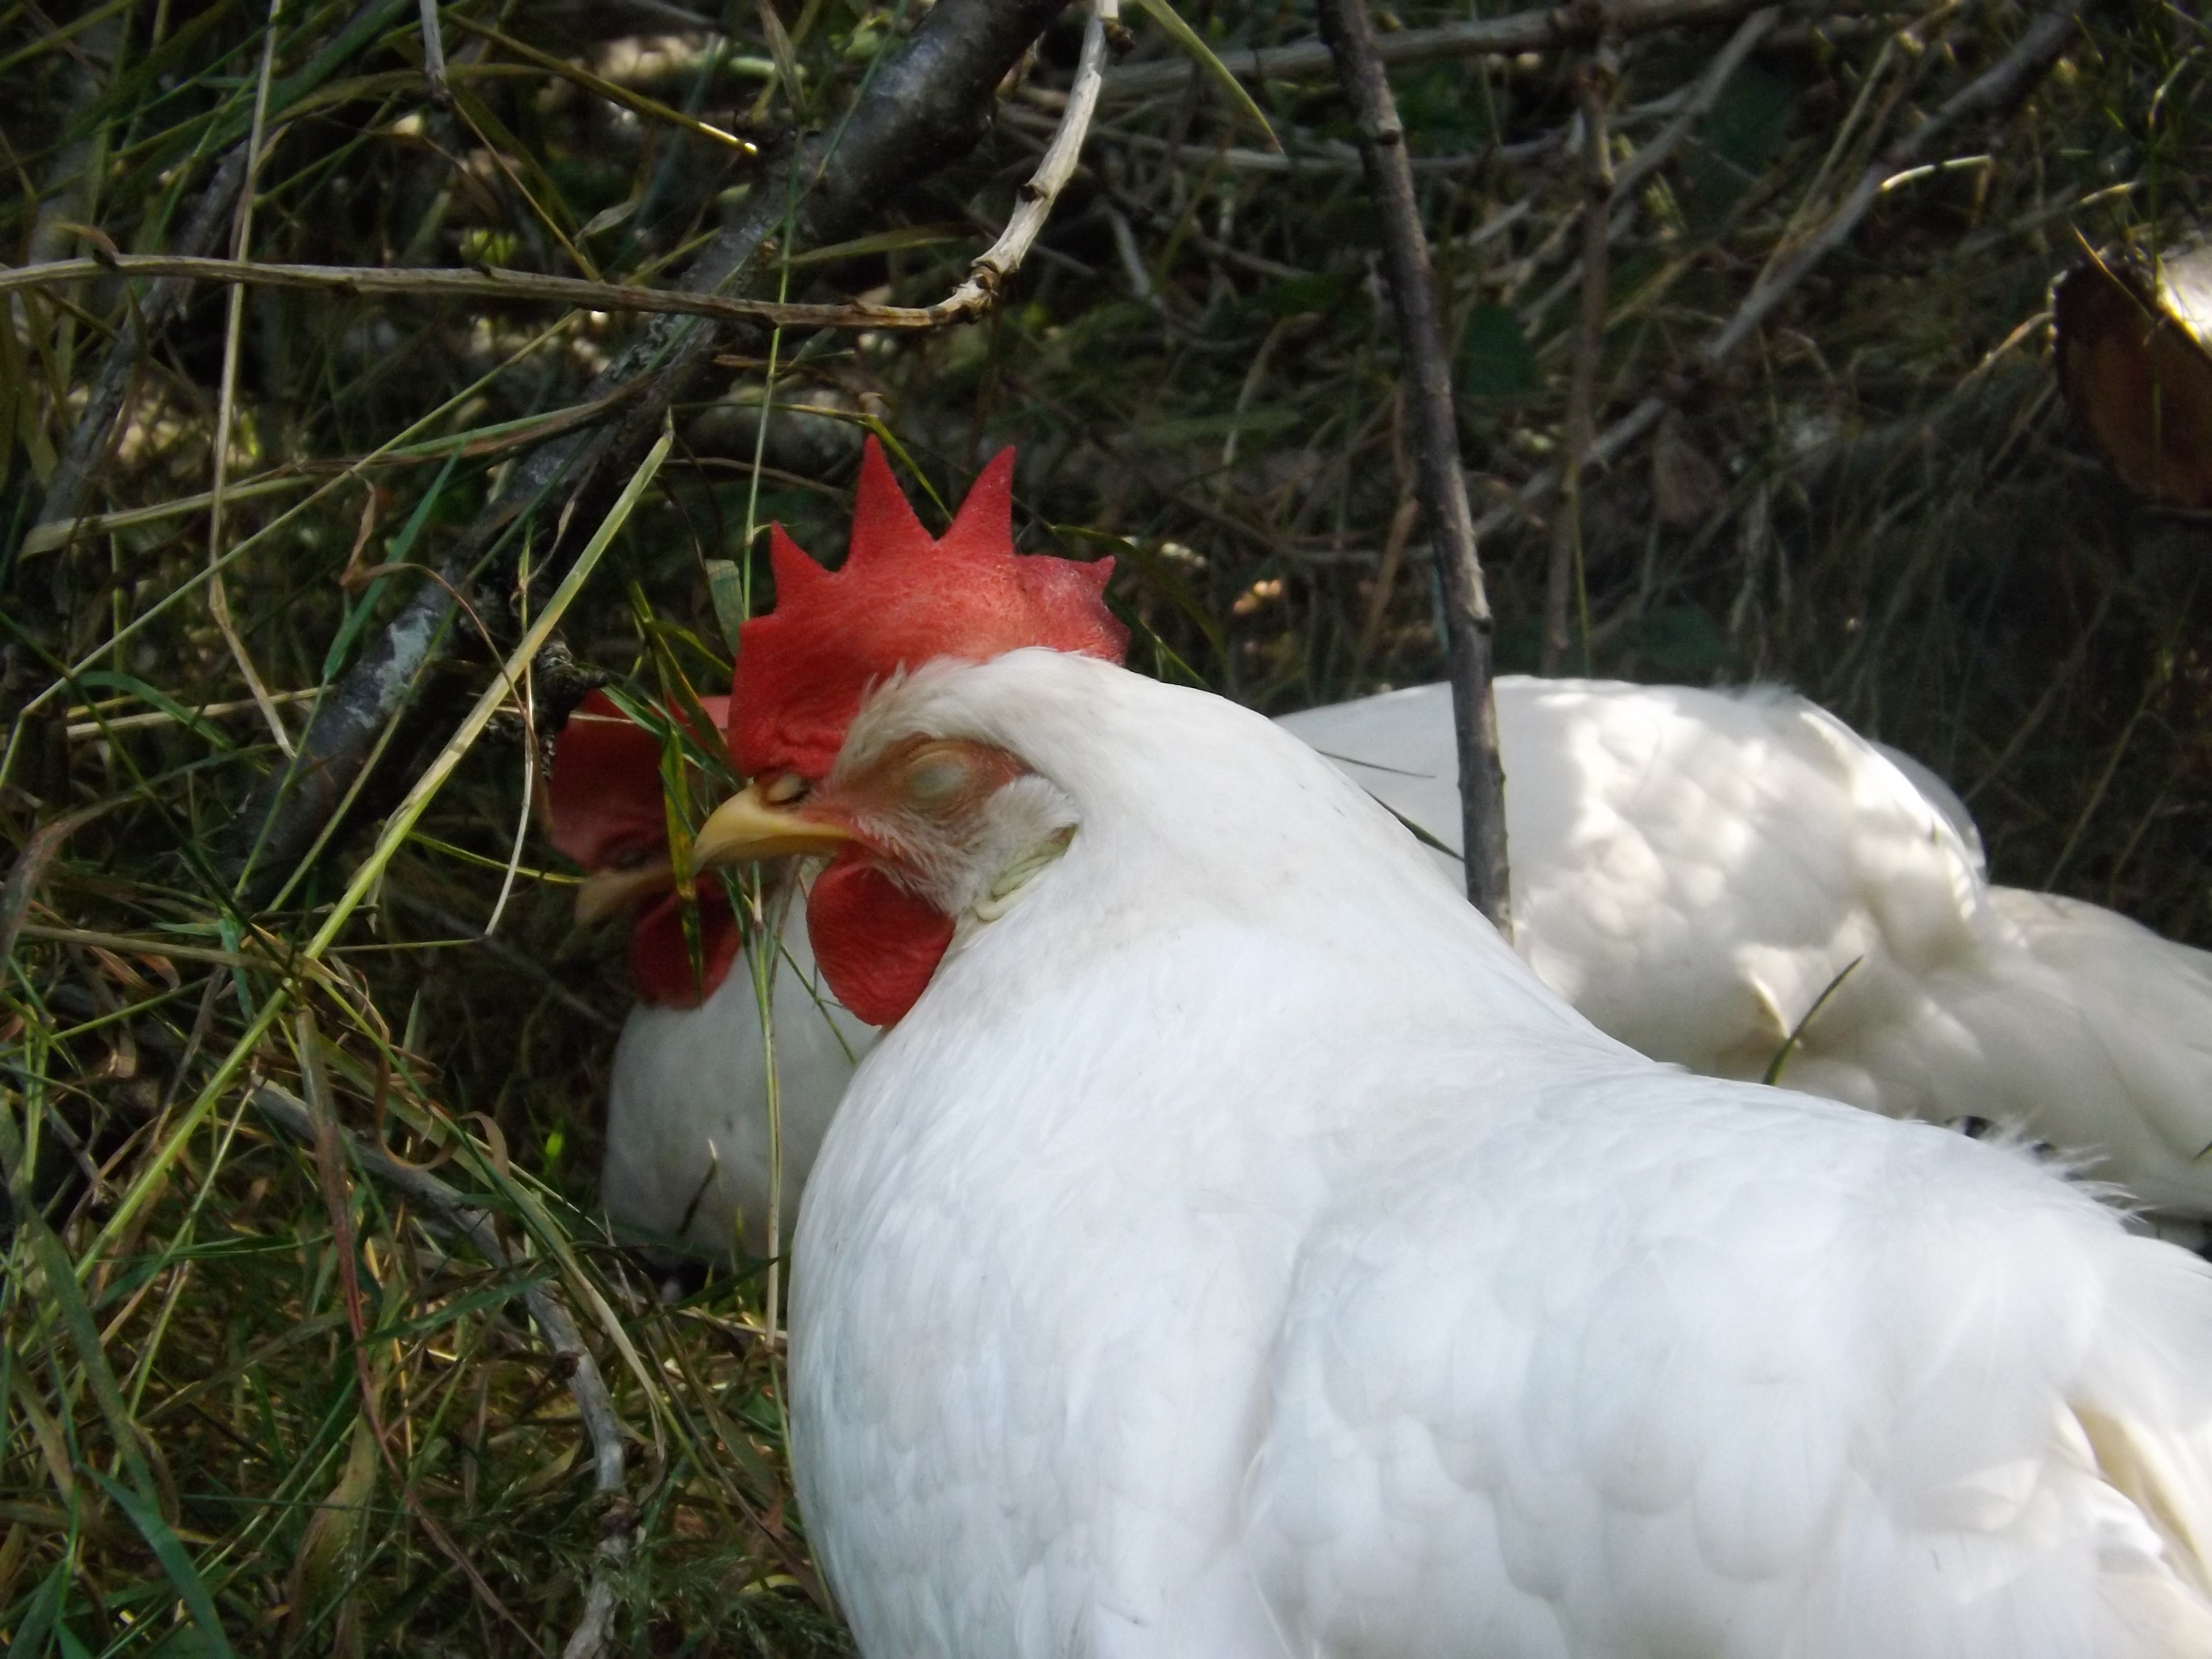 "Meany" and "Cutie" in the background two of our White Leg-horns (my kids names our chickens)